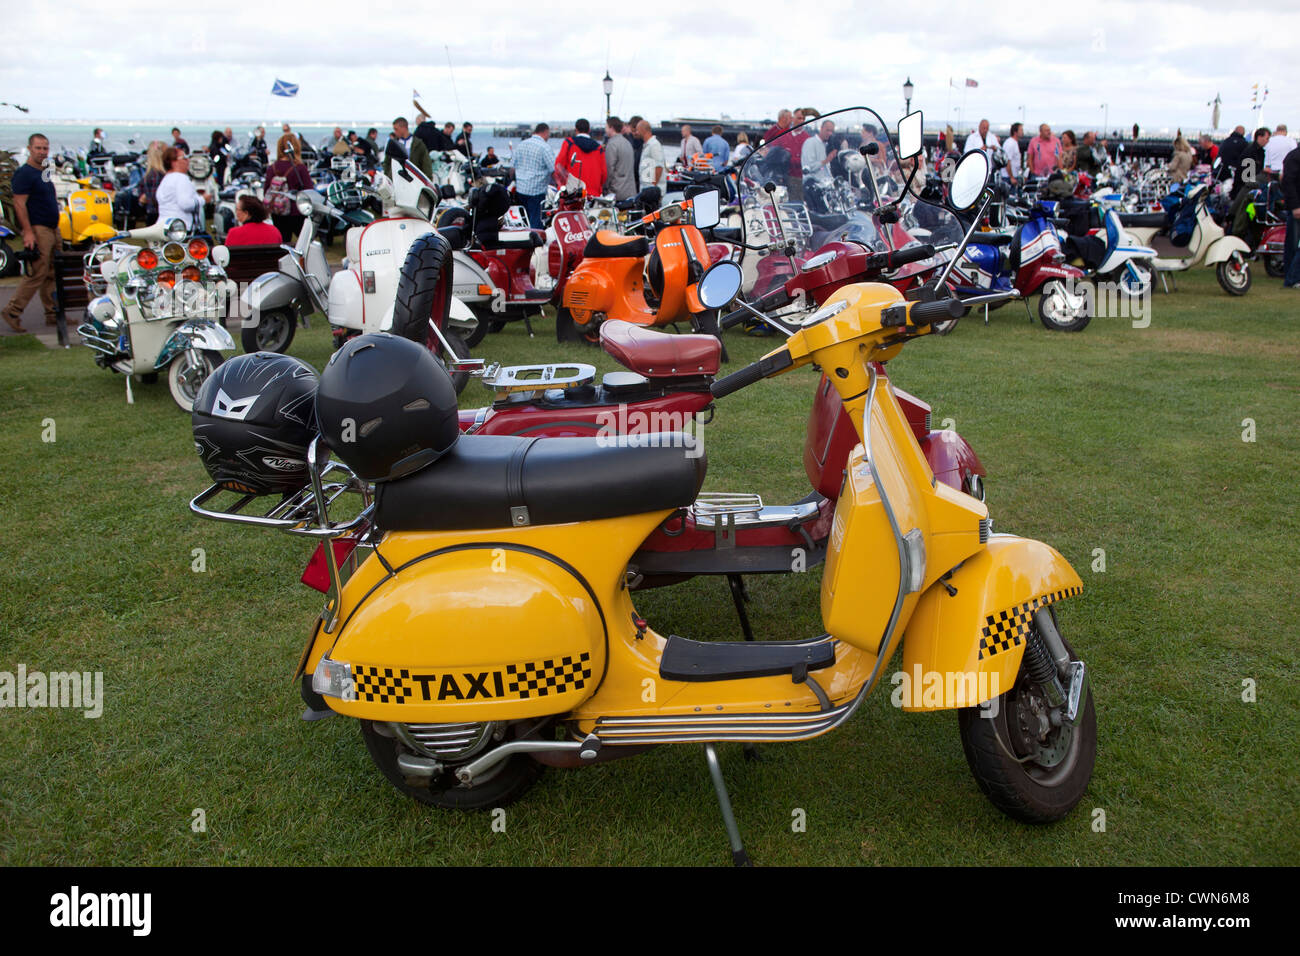 Vespa painted like yellow  taxi cab at International Scooter Rally Isle of Wight England UK Stock Photo